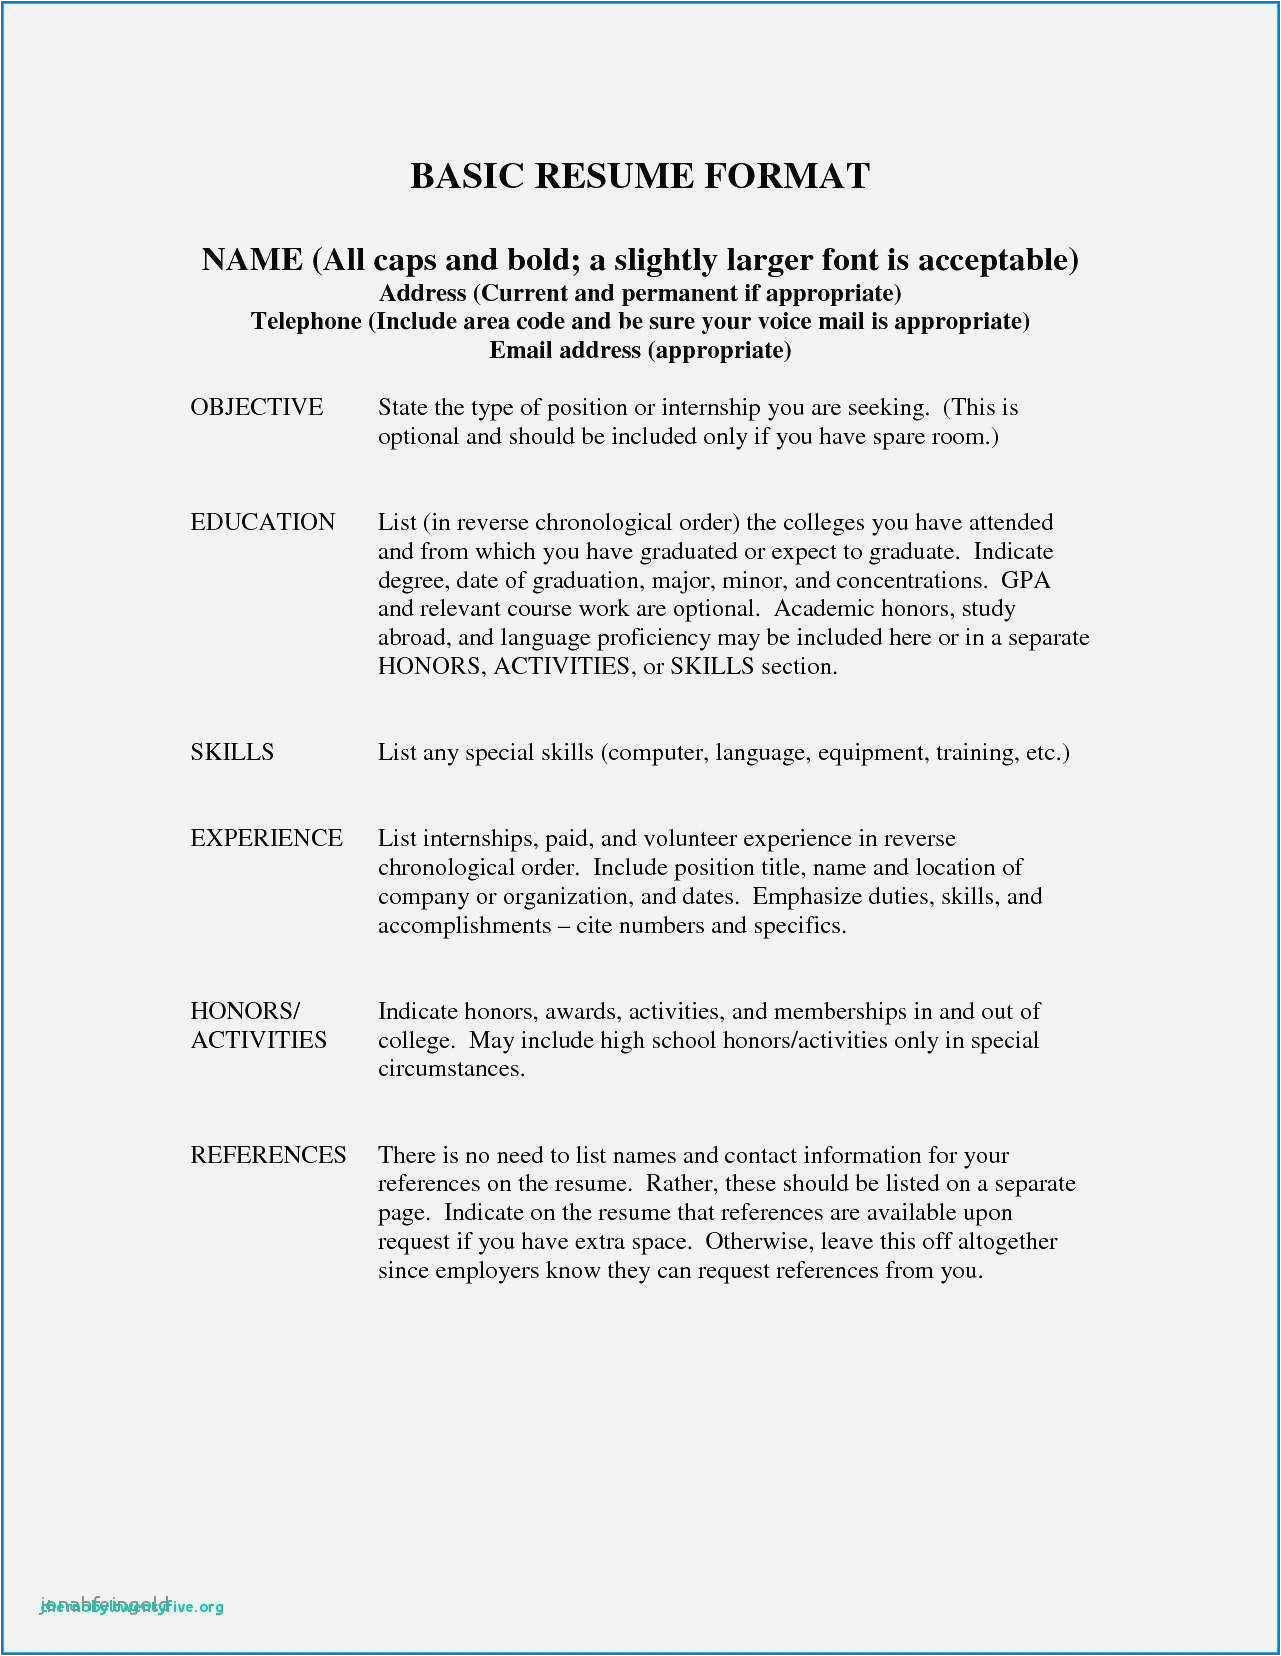 Sample Resume for Nanny In Canada Free 40 How to format Resume Professional